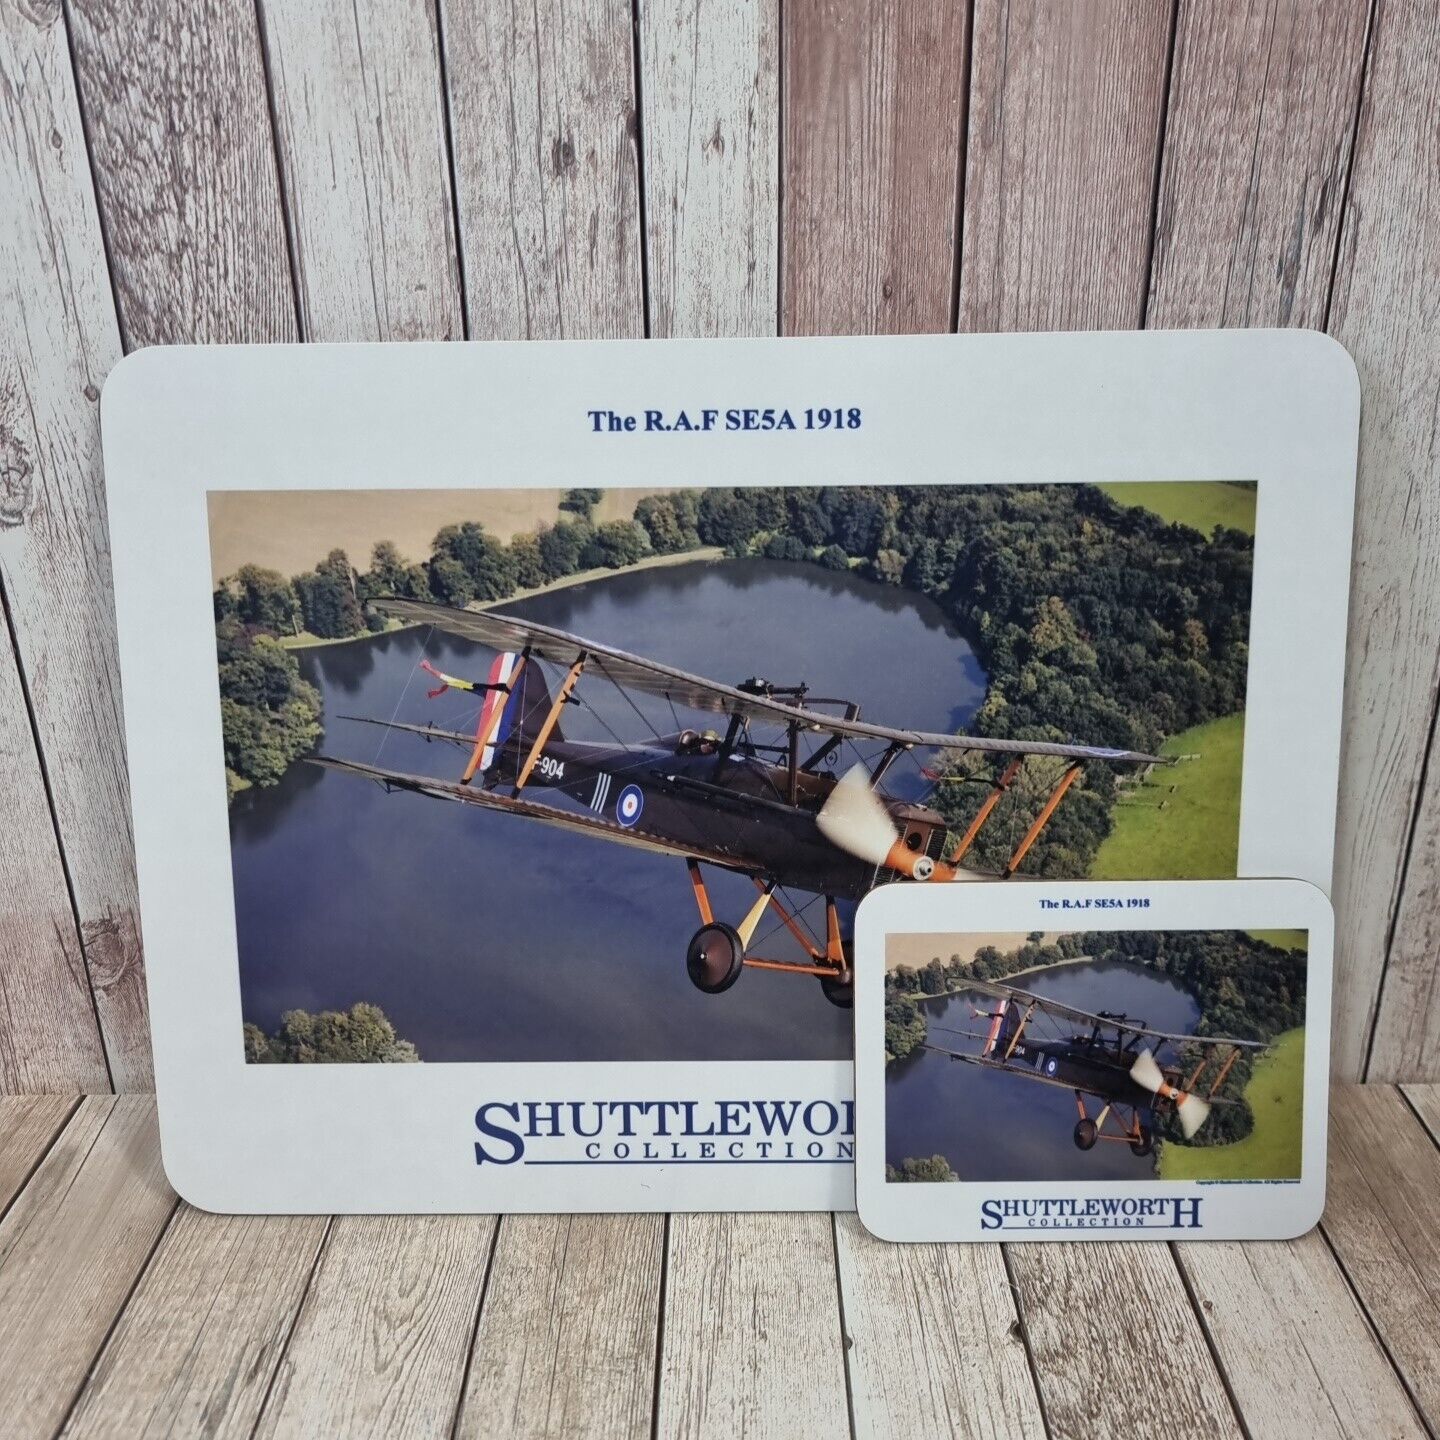 Shuttleworth Aircraft Collection R.A.F SE5A 1918 Placemat and Coaster Set